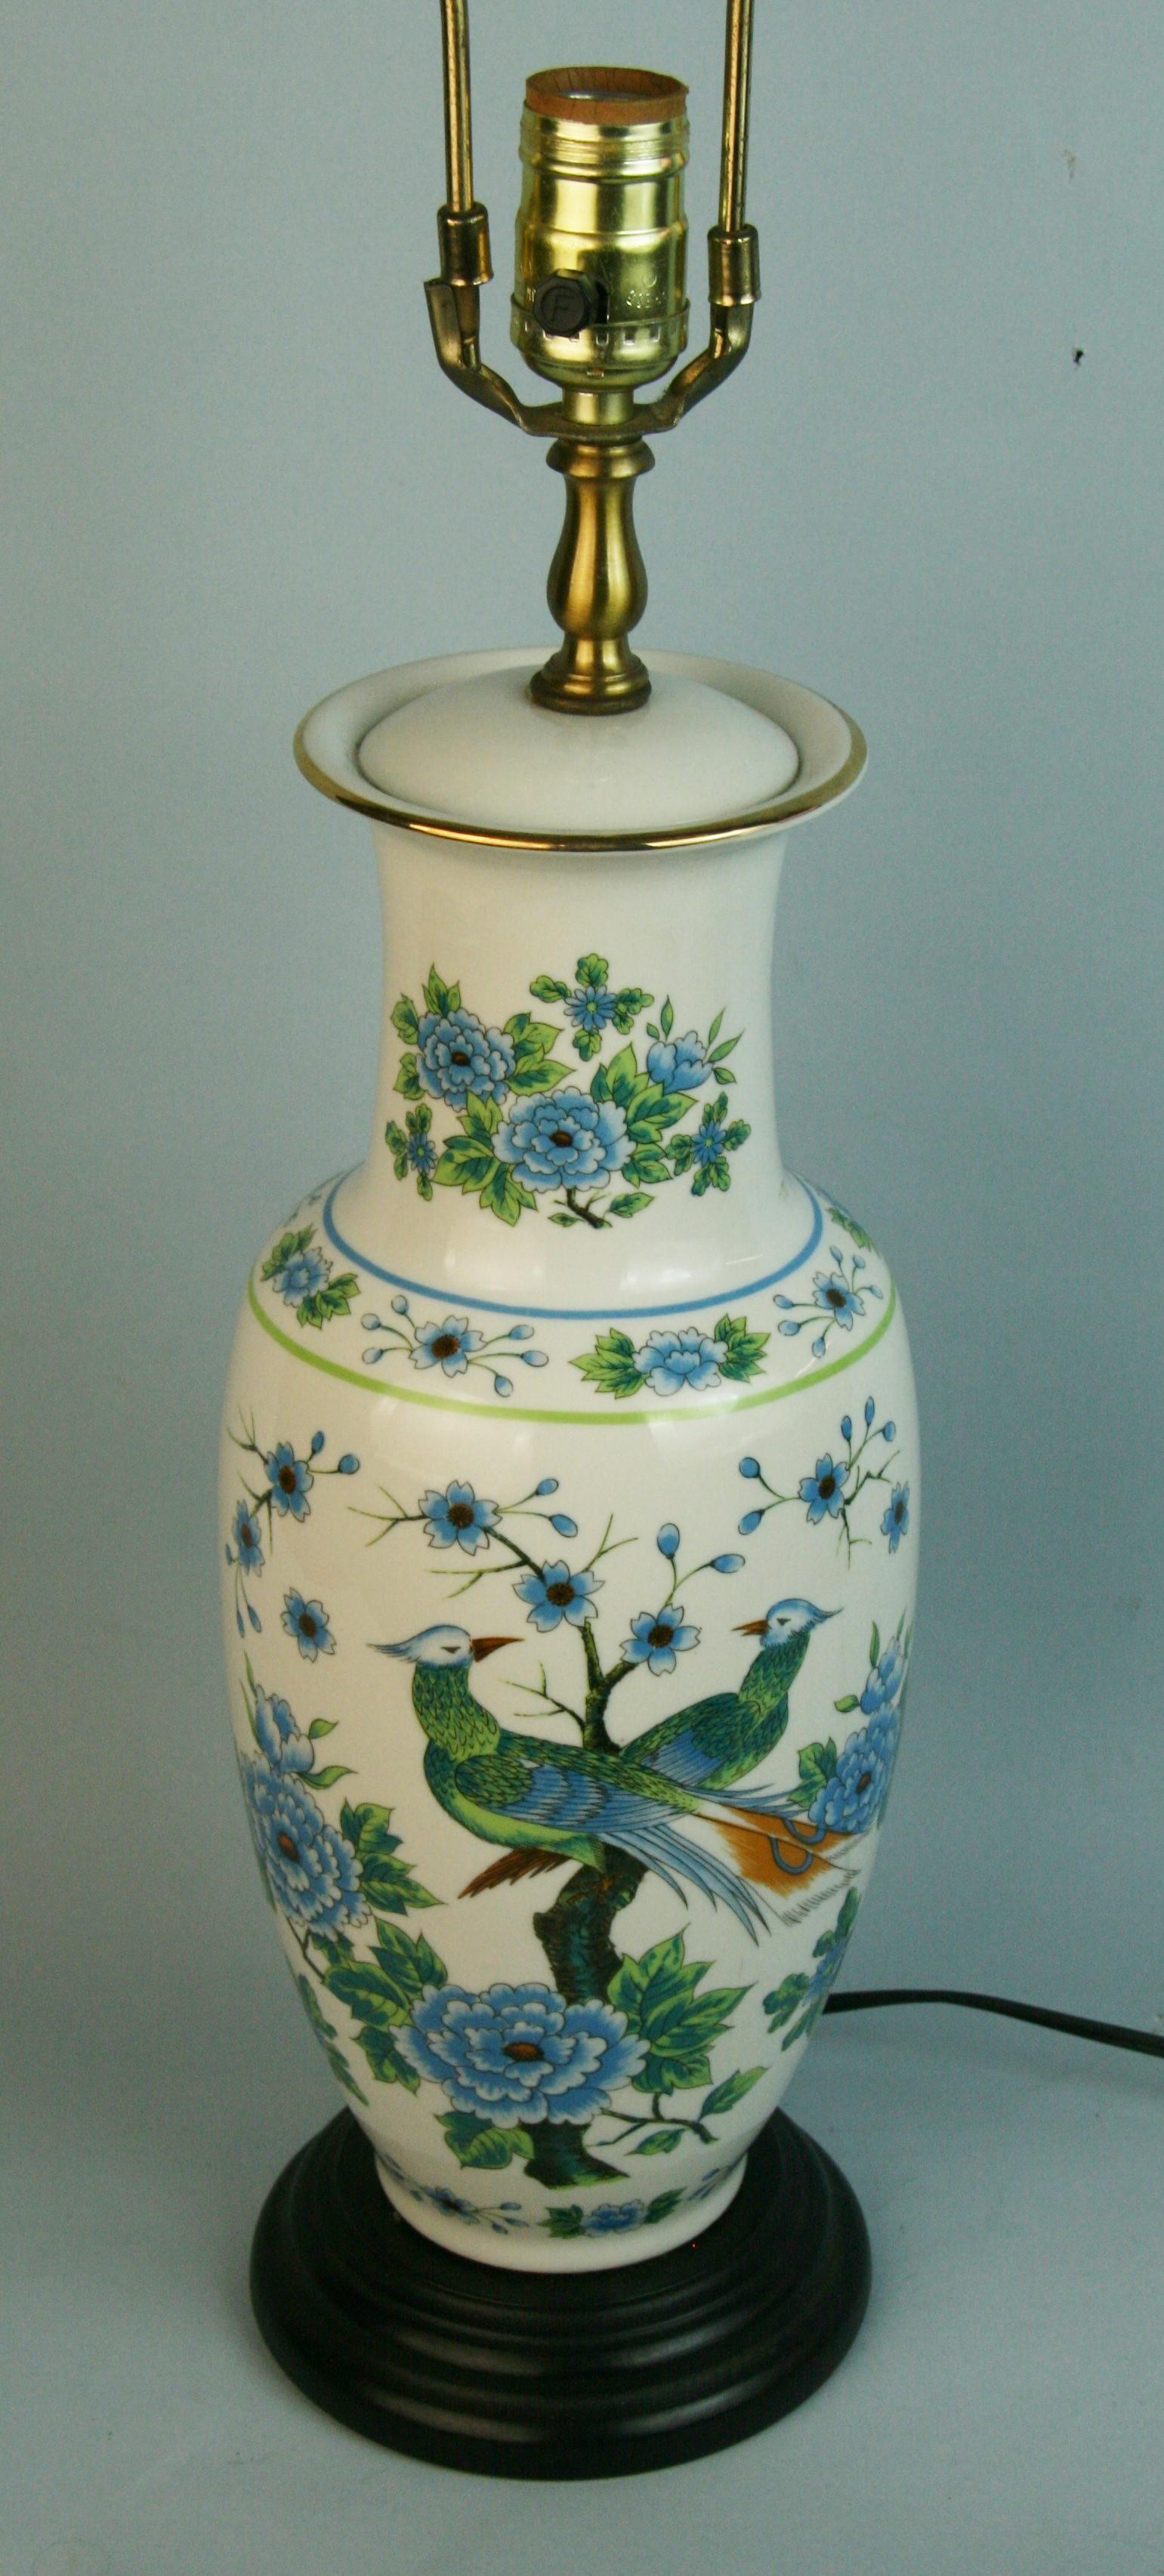 Japanese Porcelain Blue and White Birds and Flowers Lamp 1960's For Sale 3